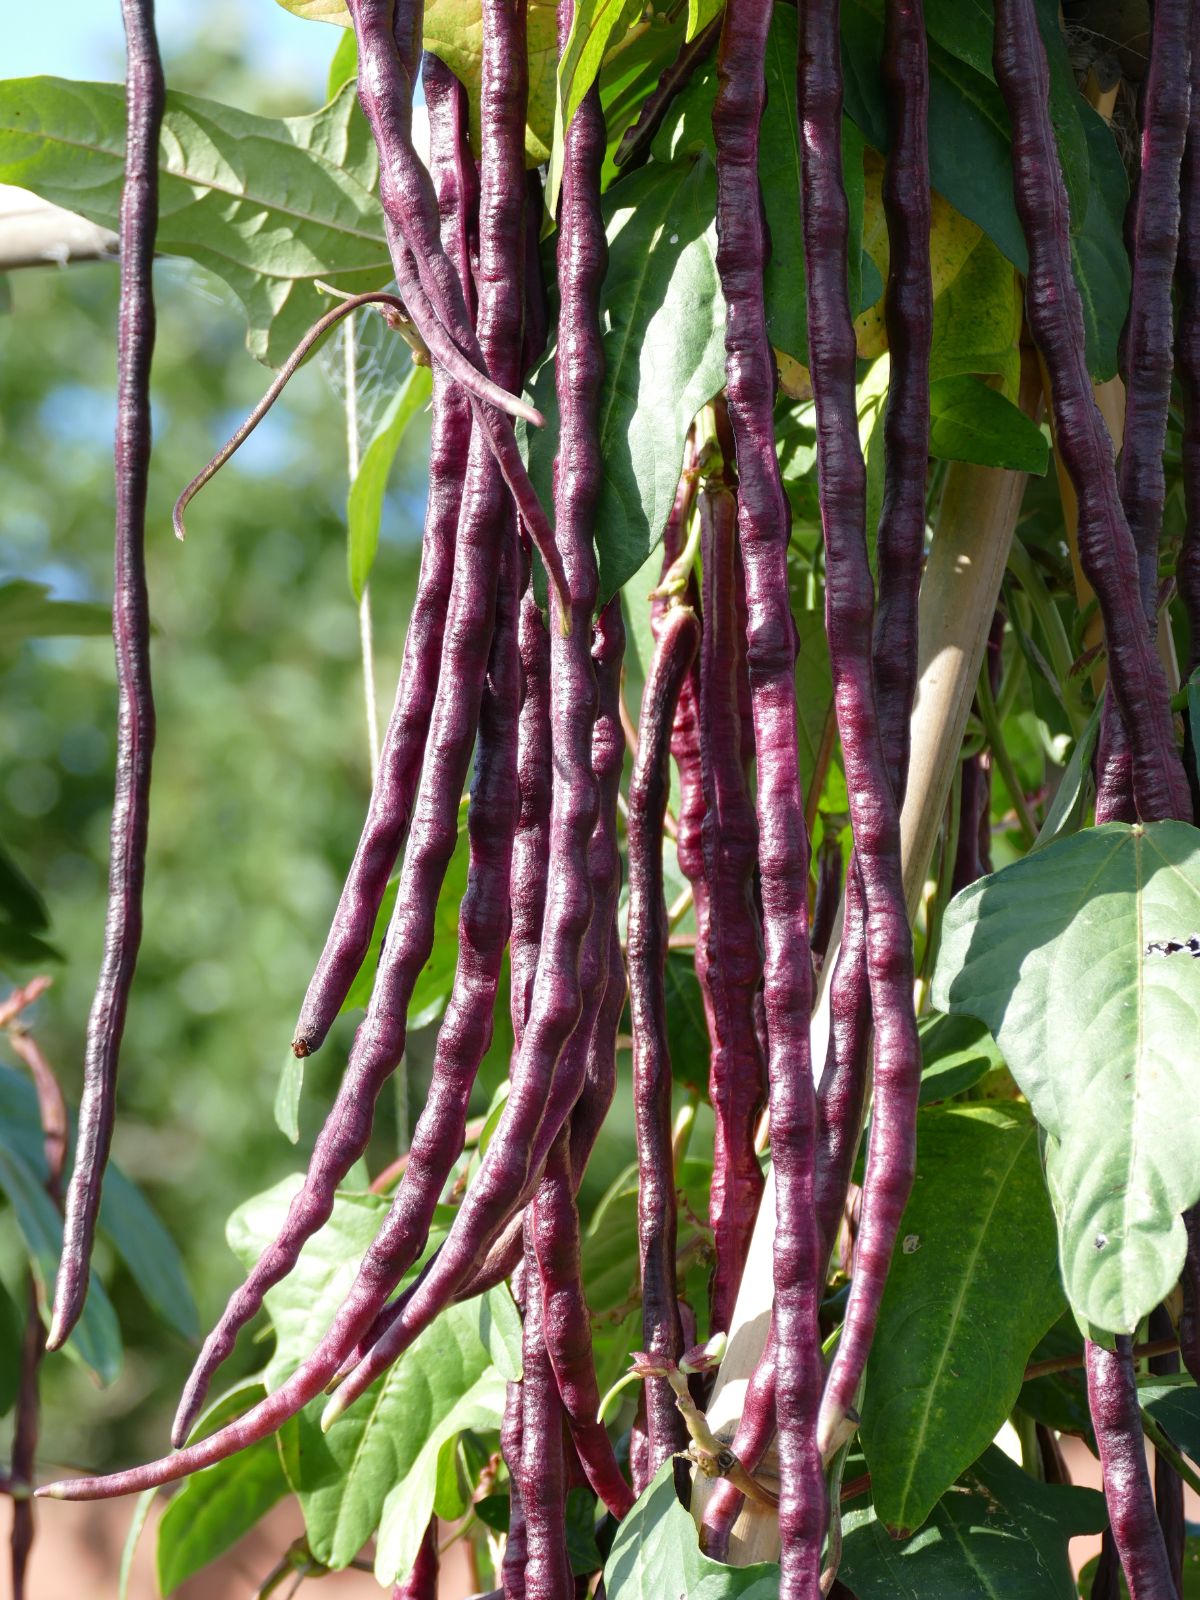 Long purple-red Chinese red noodle beans growing on a trellis